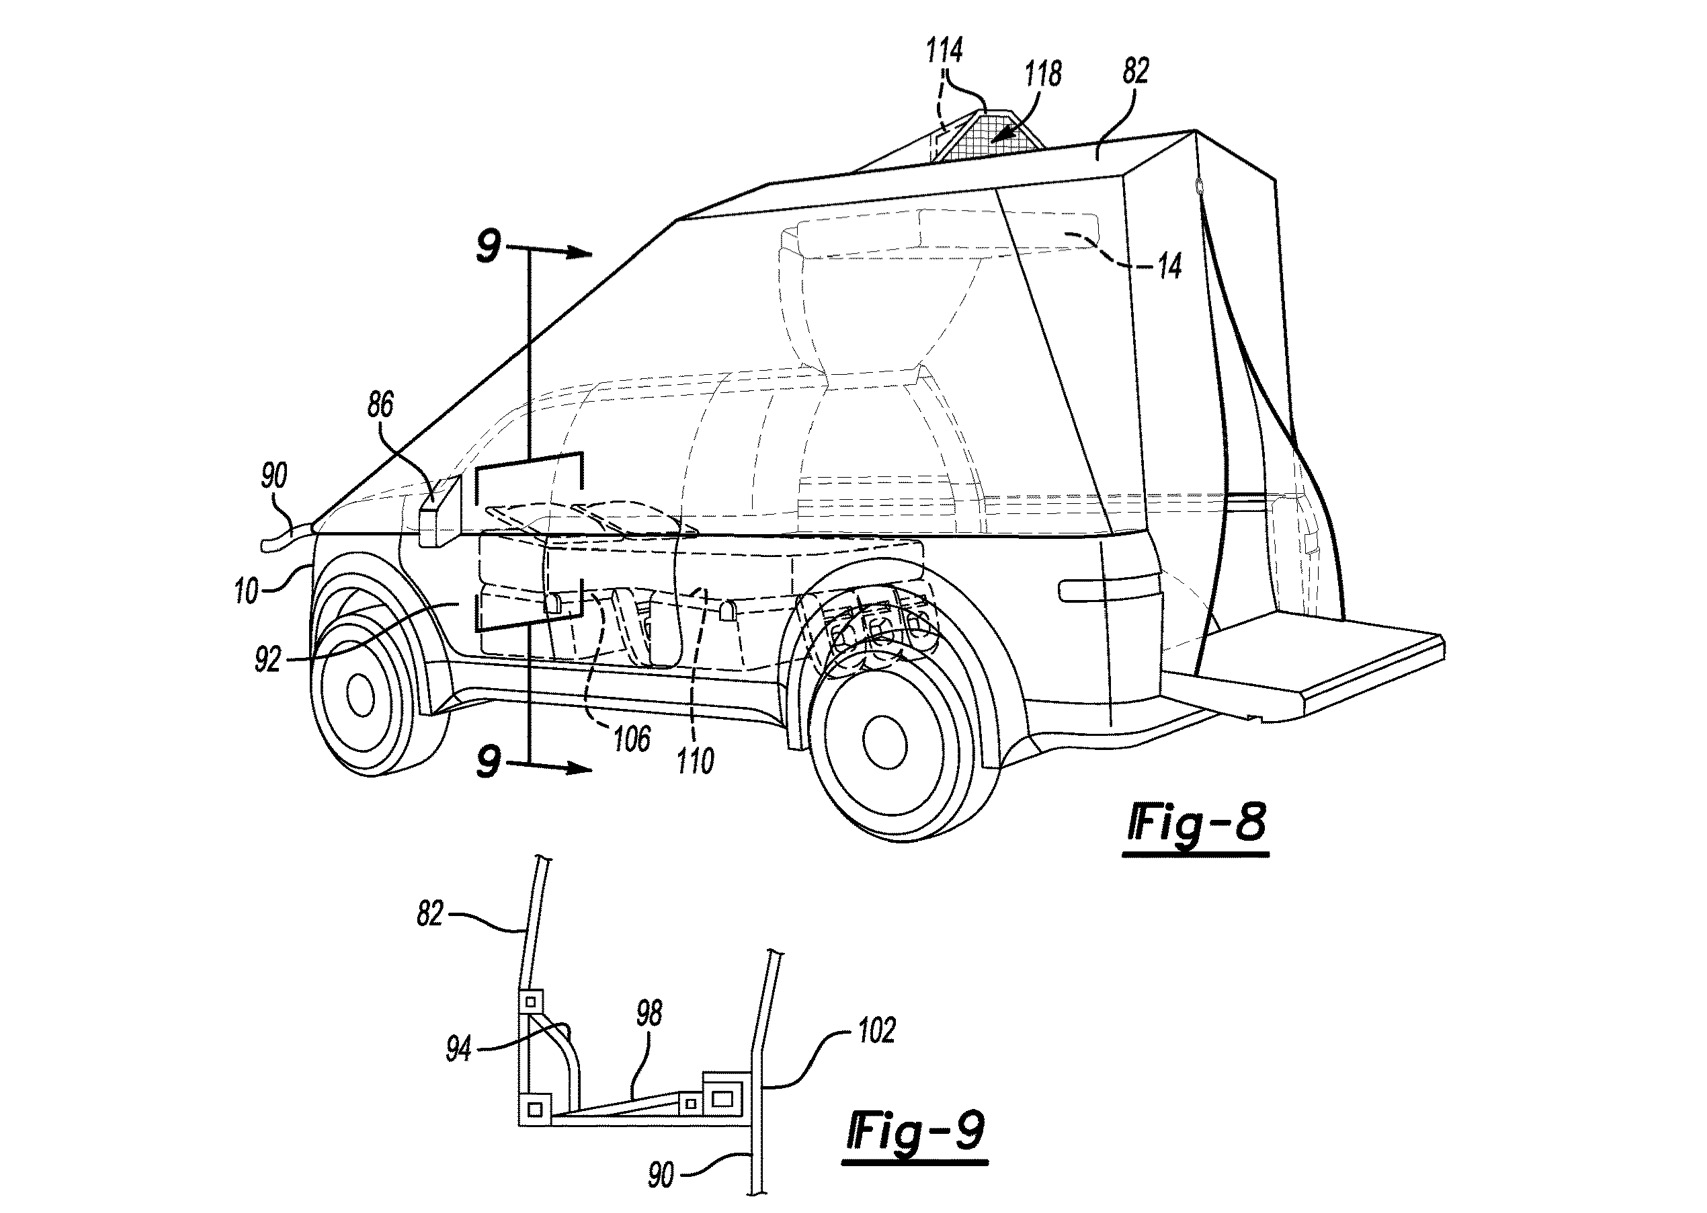 the-wiring-diagram-for-a-ford-truck-that-is-not-in-use-it-has-been